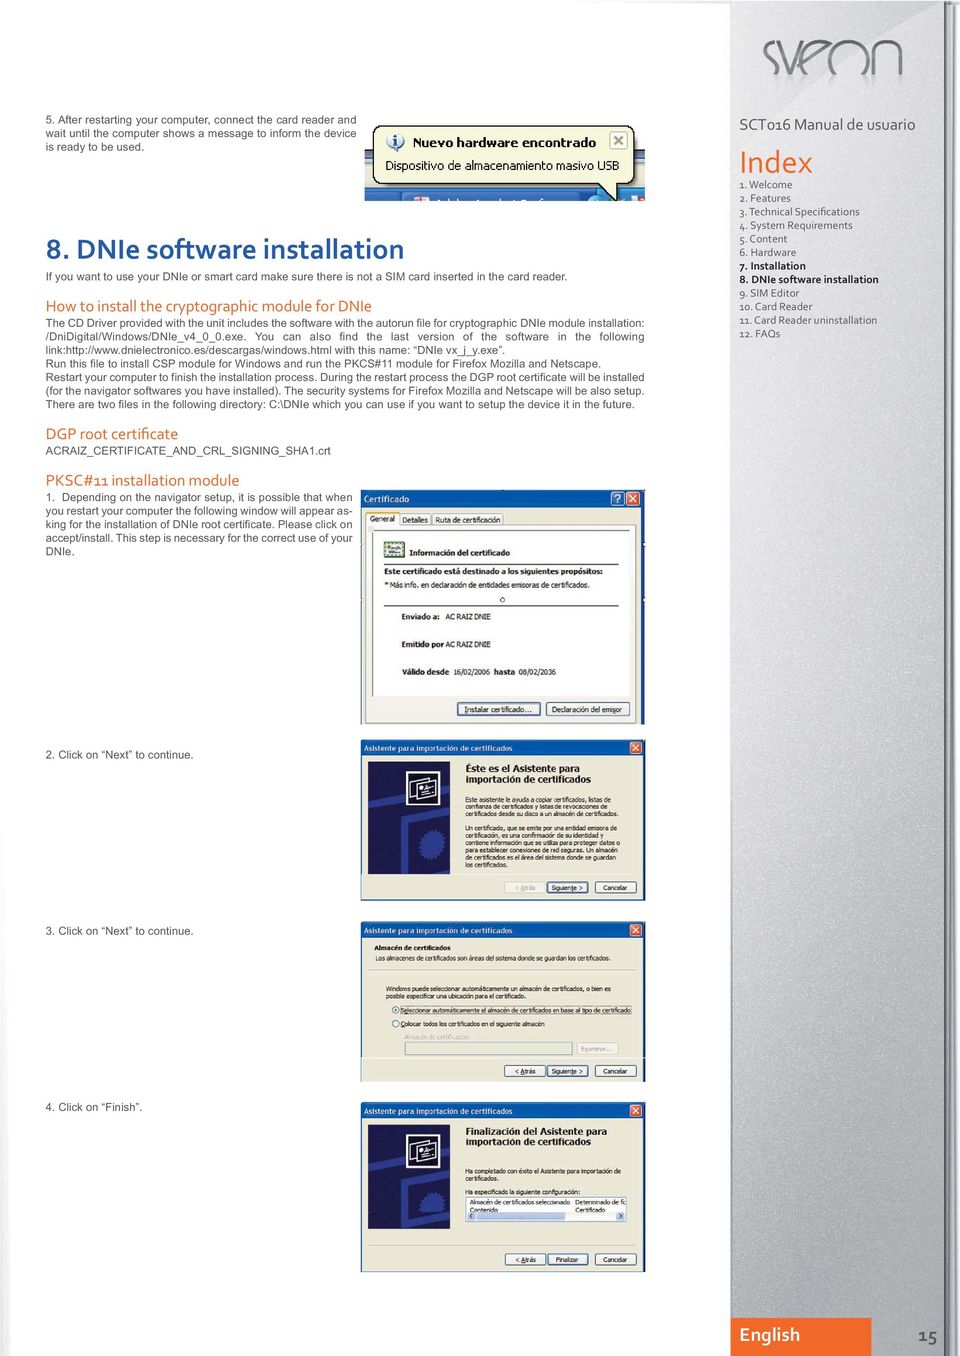 How to install the cryptographic module for DNIe The CD Driver provided with the unit includes the software with the autorun file for cryptographic DNIe module installation: